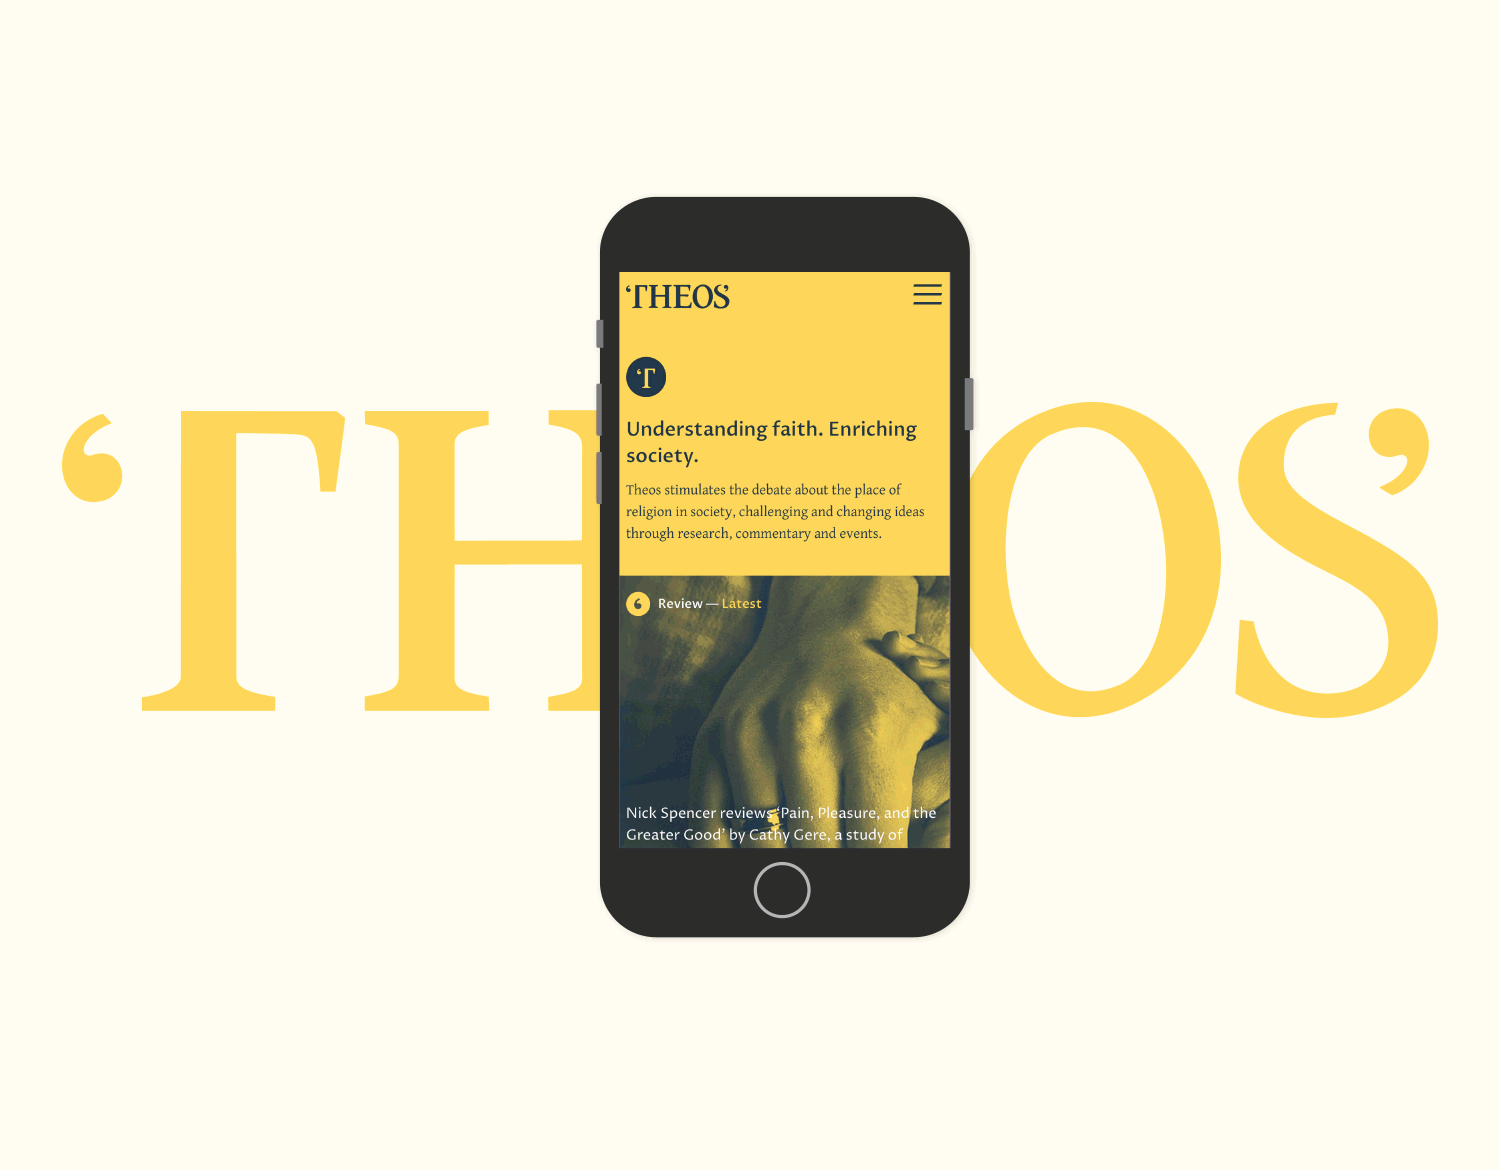 Theos - Bringing an enriching voice to life